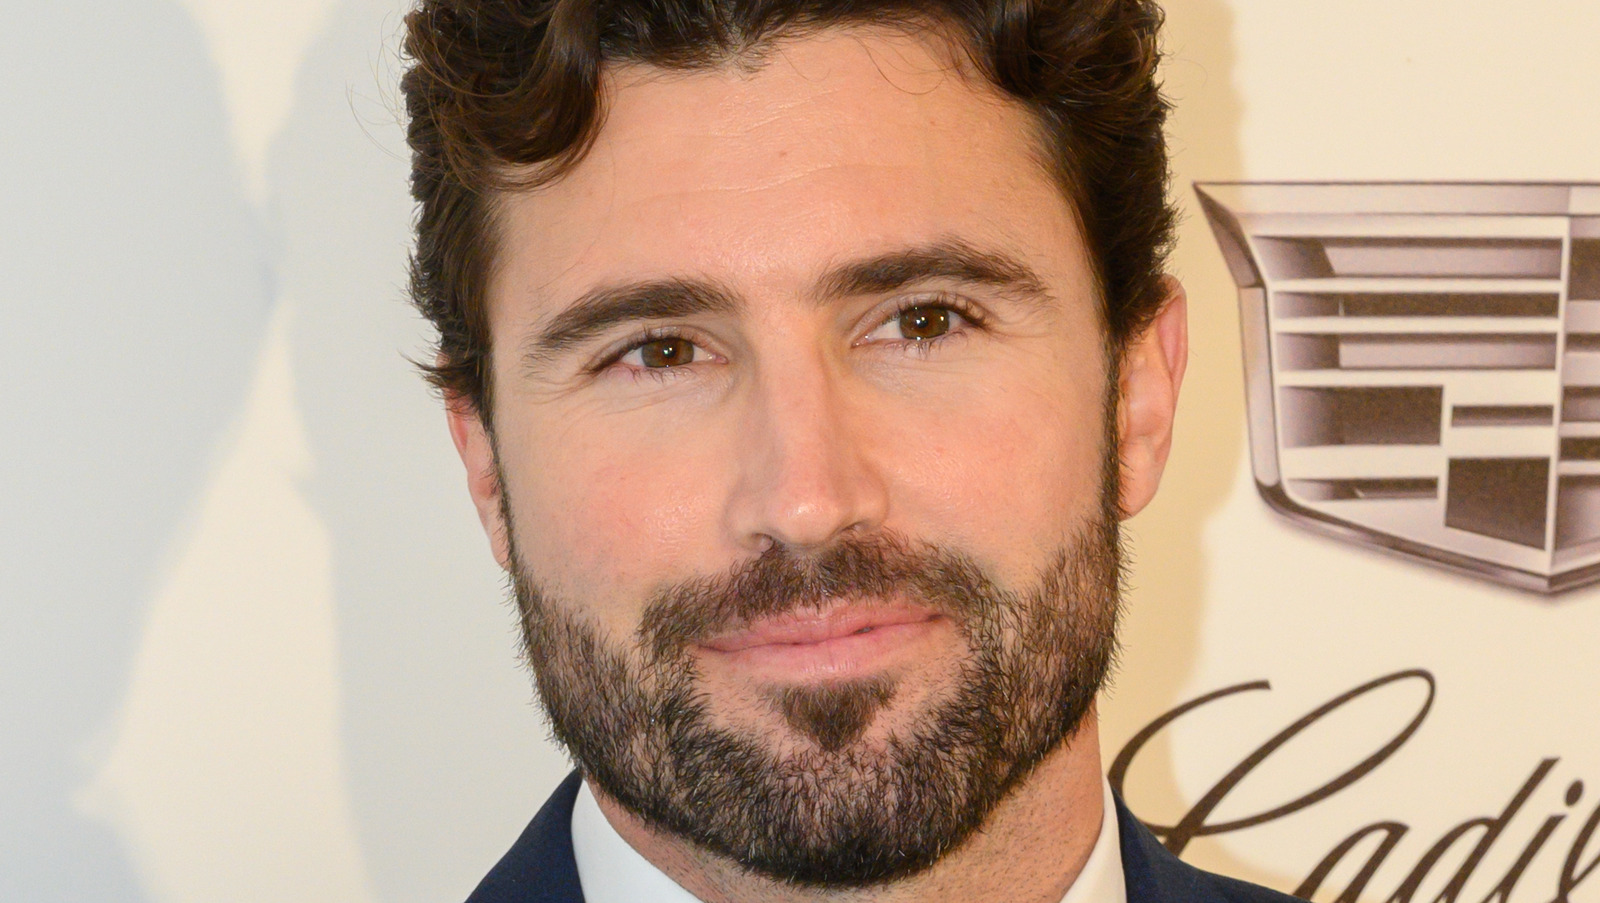 Brody Jenner’s Growing up and Career: A View